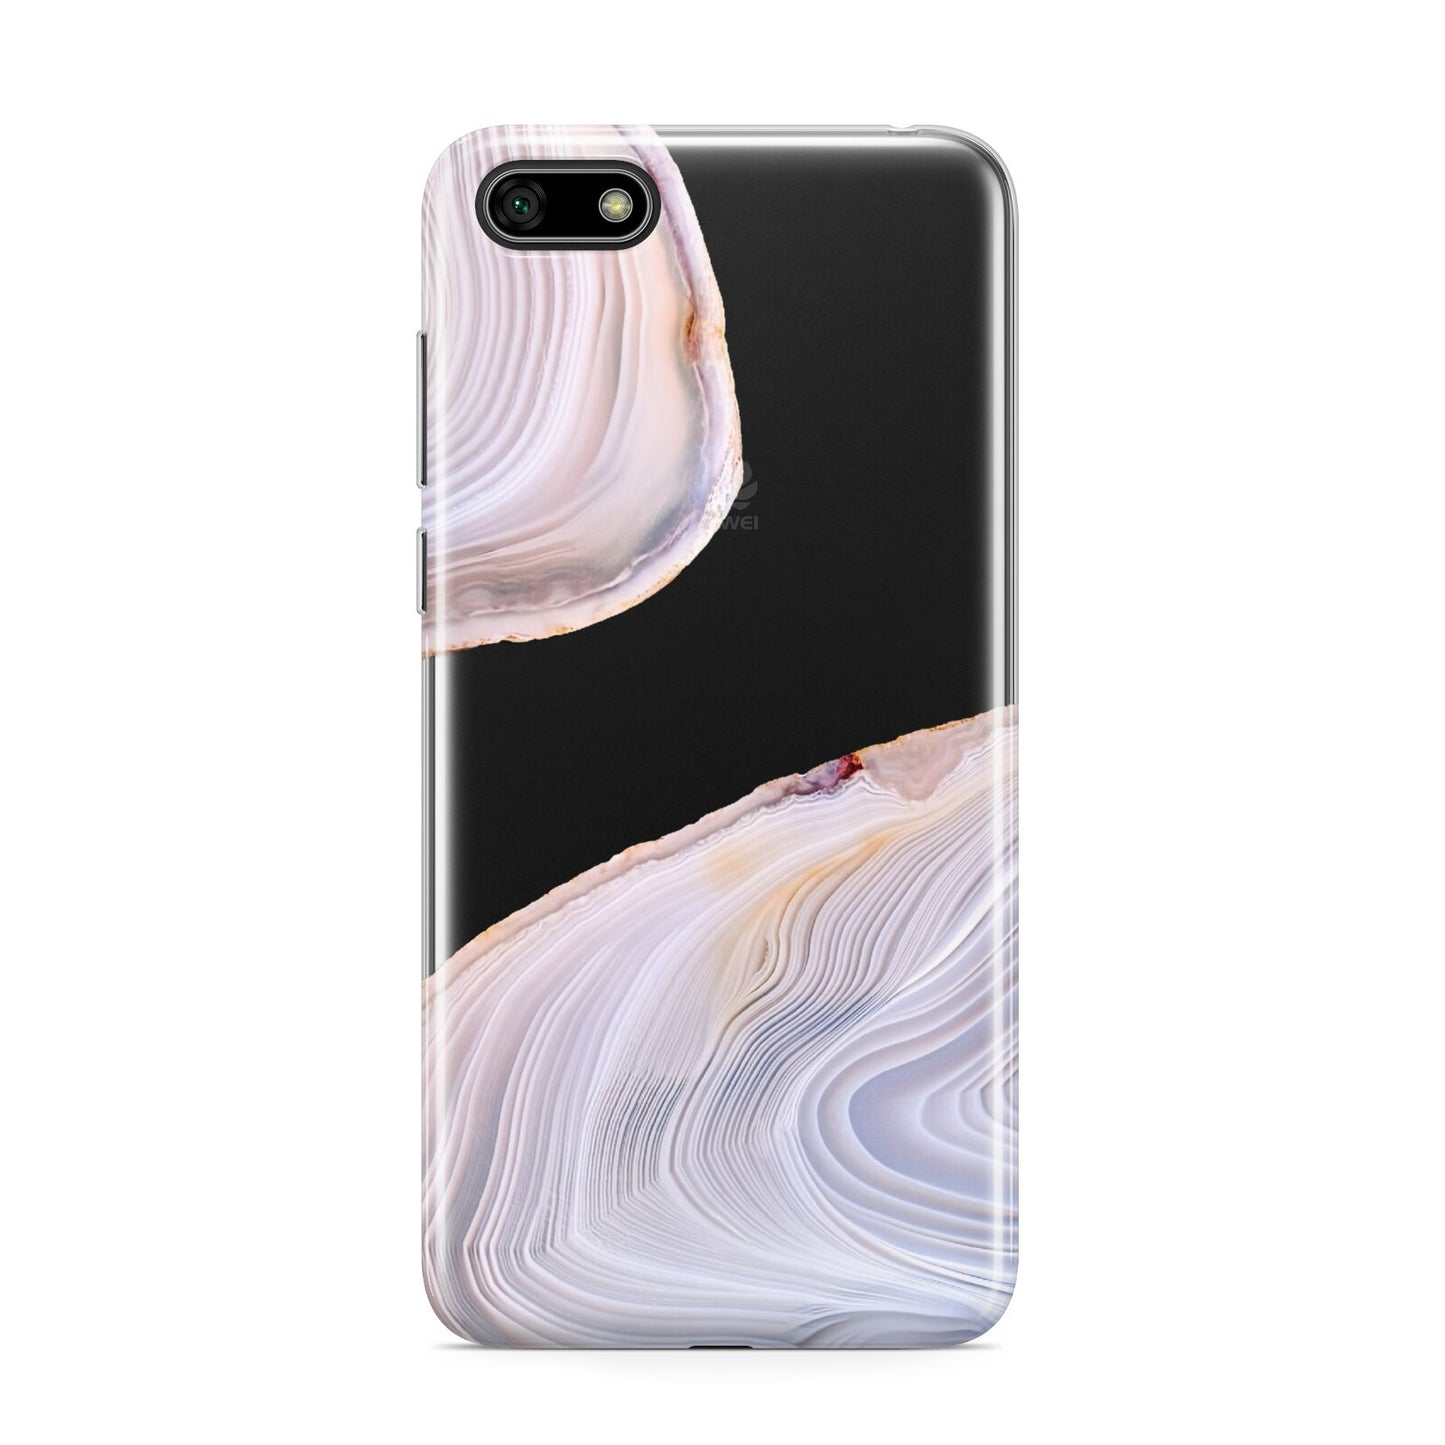 Agate Pale Pink and Blue Huawei Y5 Prime 2018 Phone Case